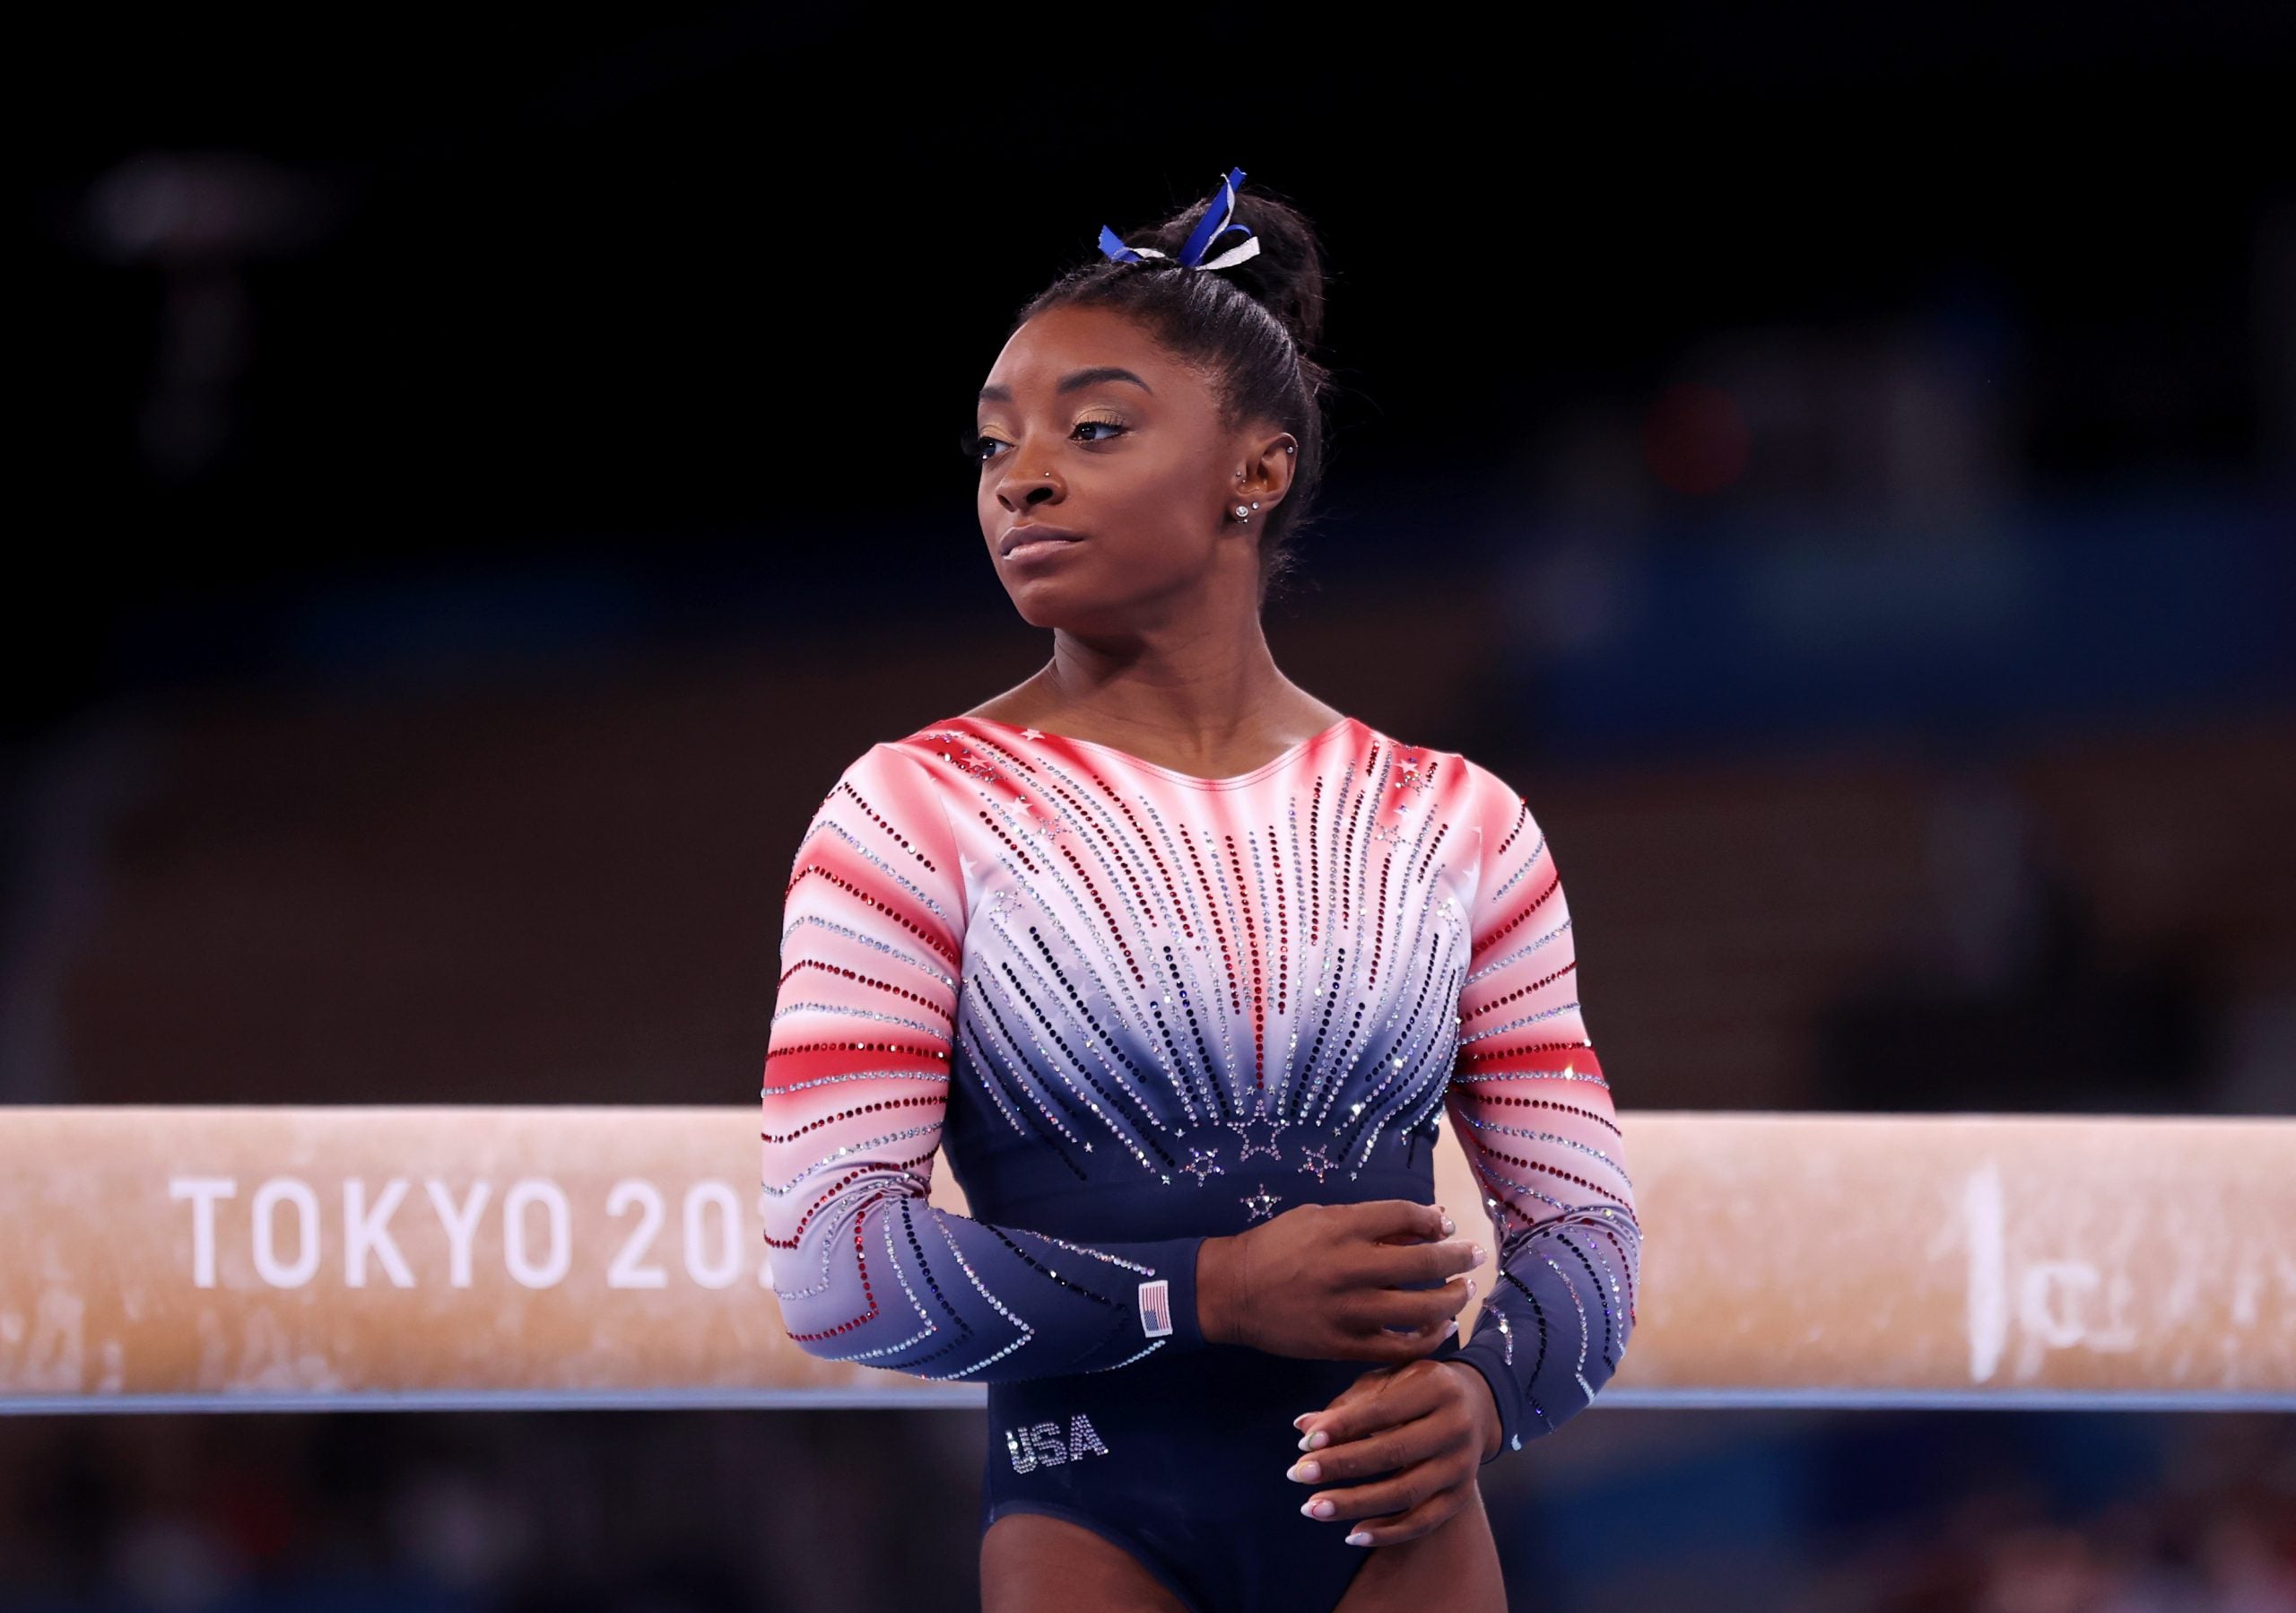 Simone Biles Says She "Should Have Quit" Gymnastics Before Even Entering the Tokyo Olympics